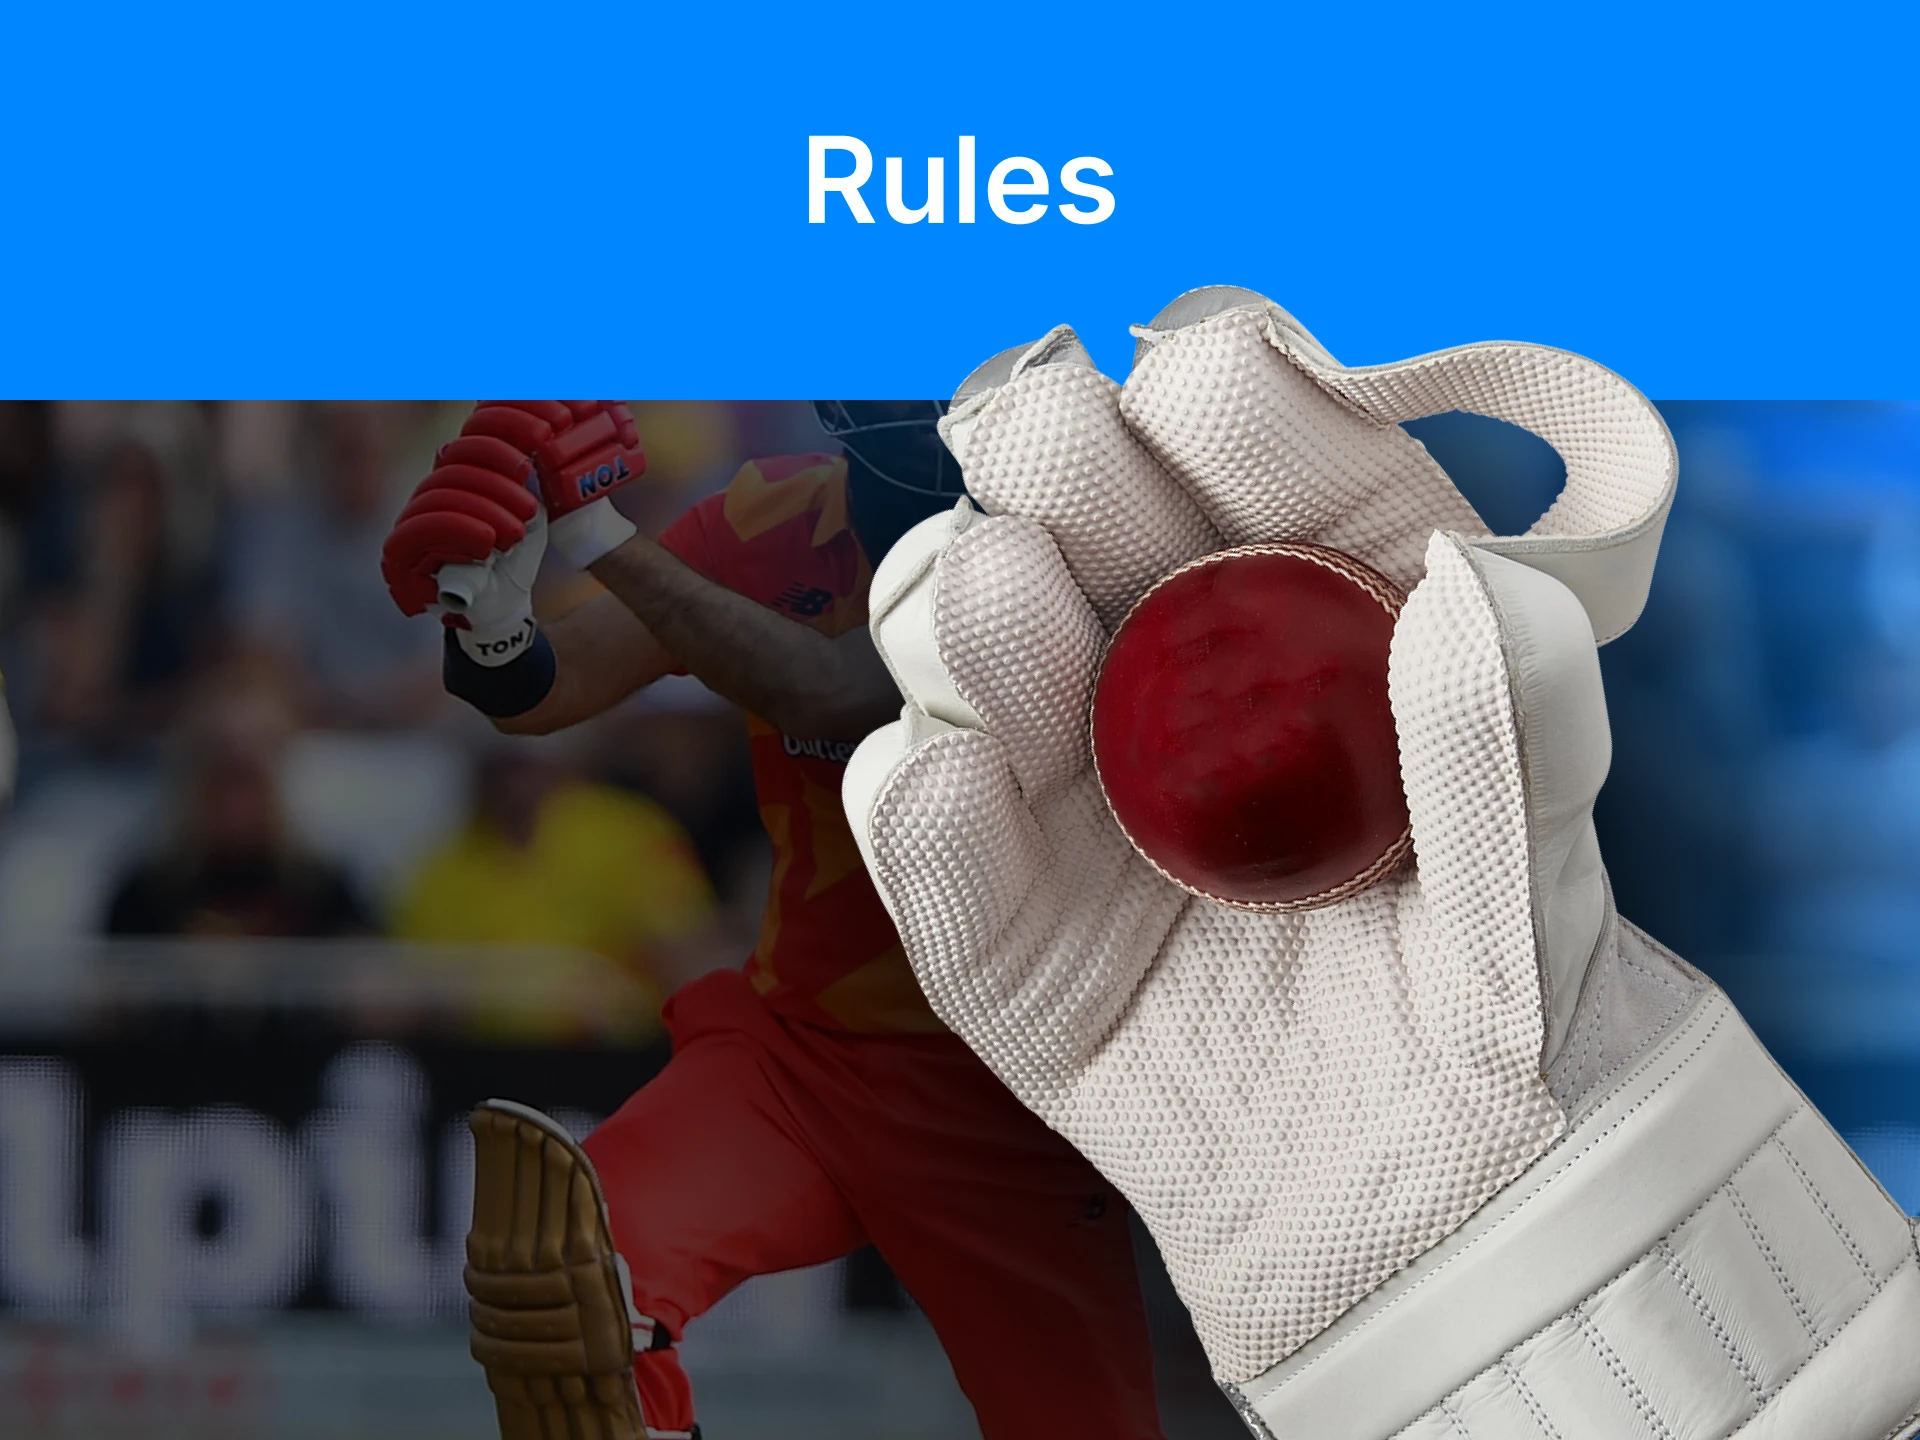 Follow all of the The Hundred betting rules.